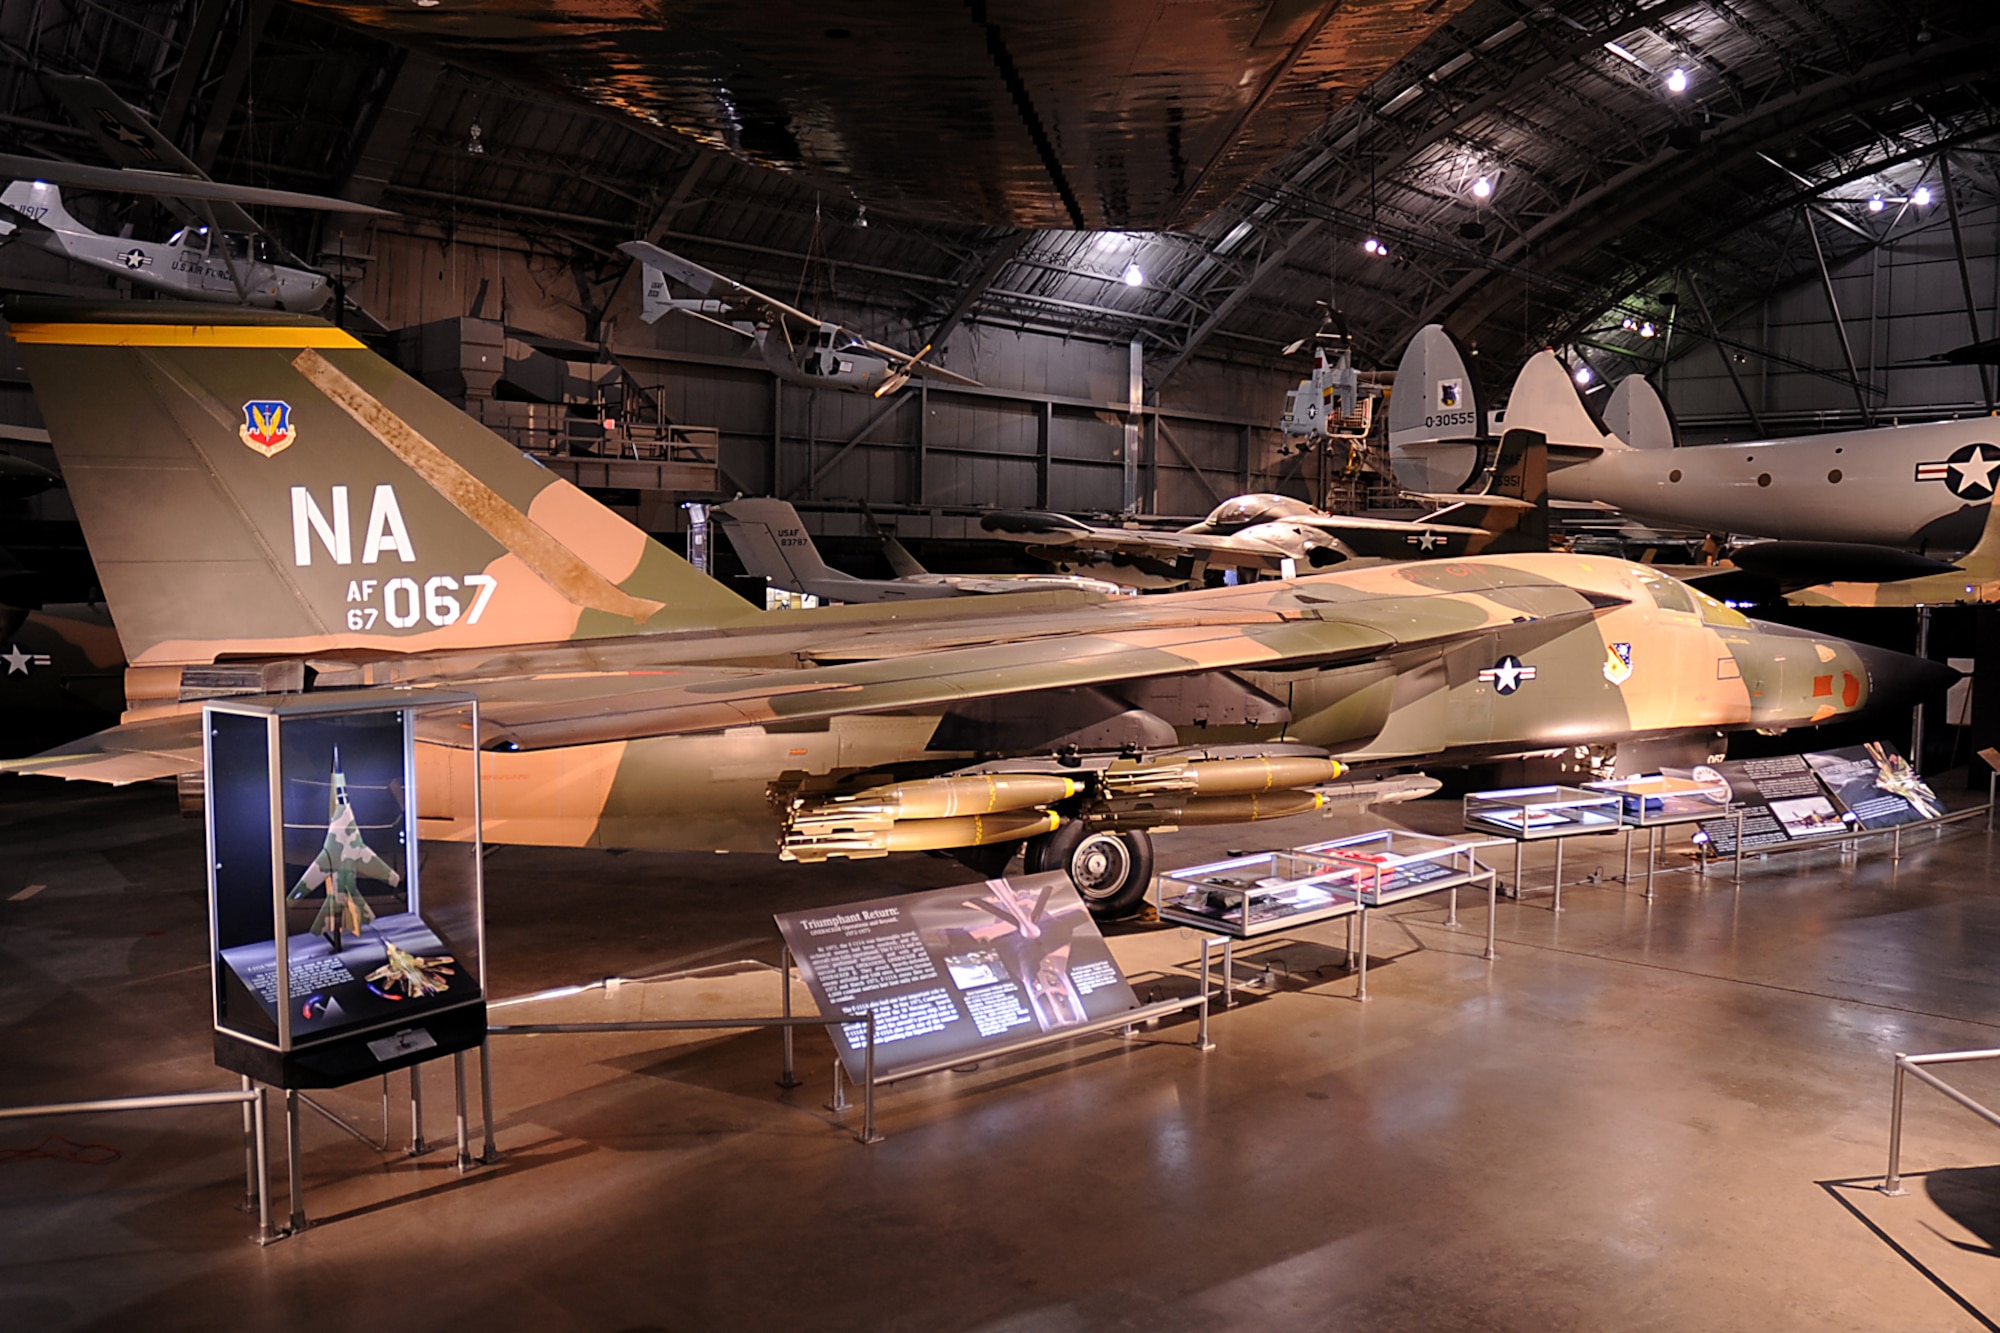 DAYTON, Ohio -- General Dynamics F-111A in the Southeast Asia War Gallery at the National Museum of the United States Air Force. (U.S. Air Force photo by Ken LaRock)
